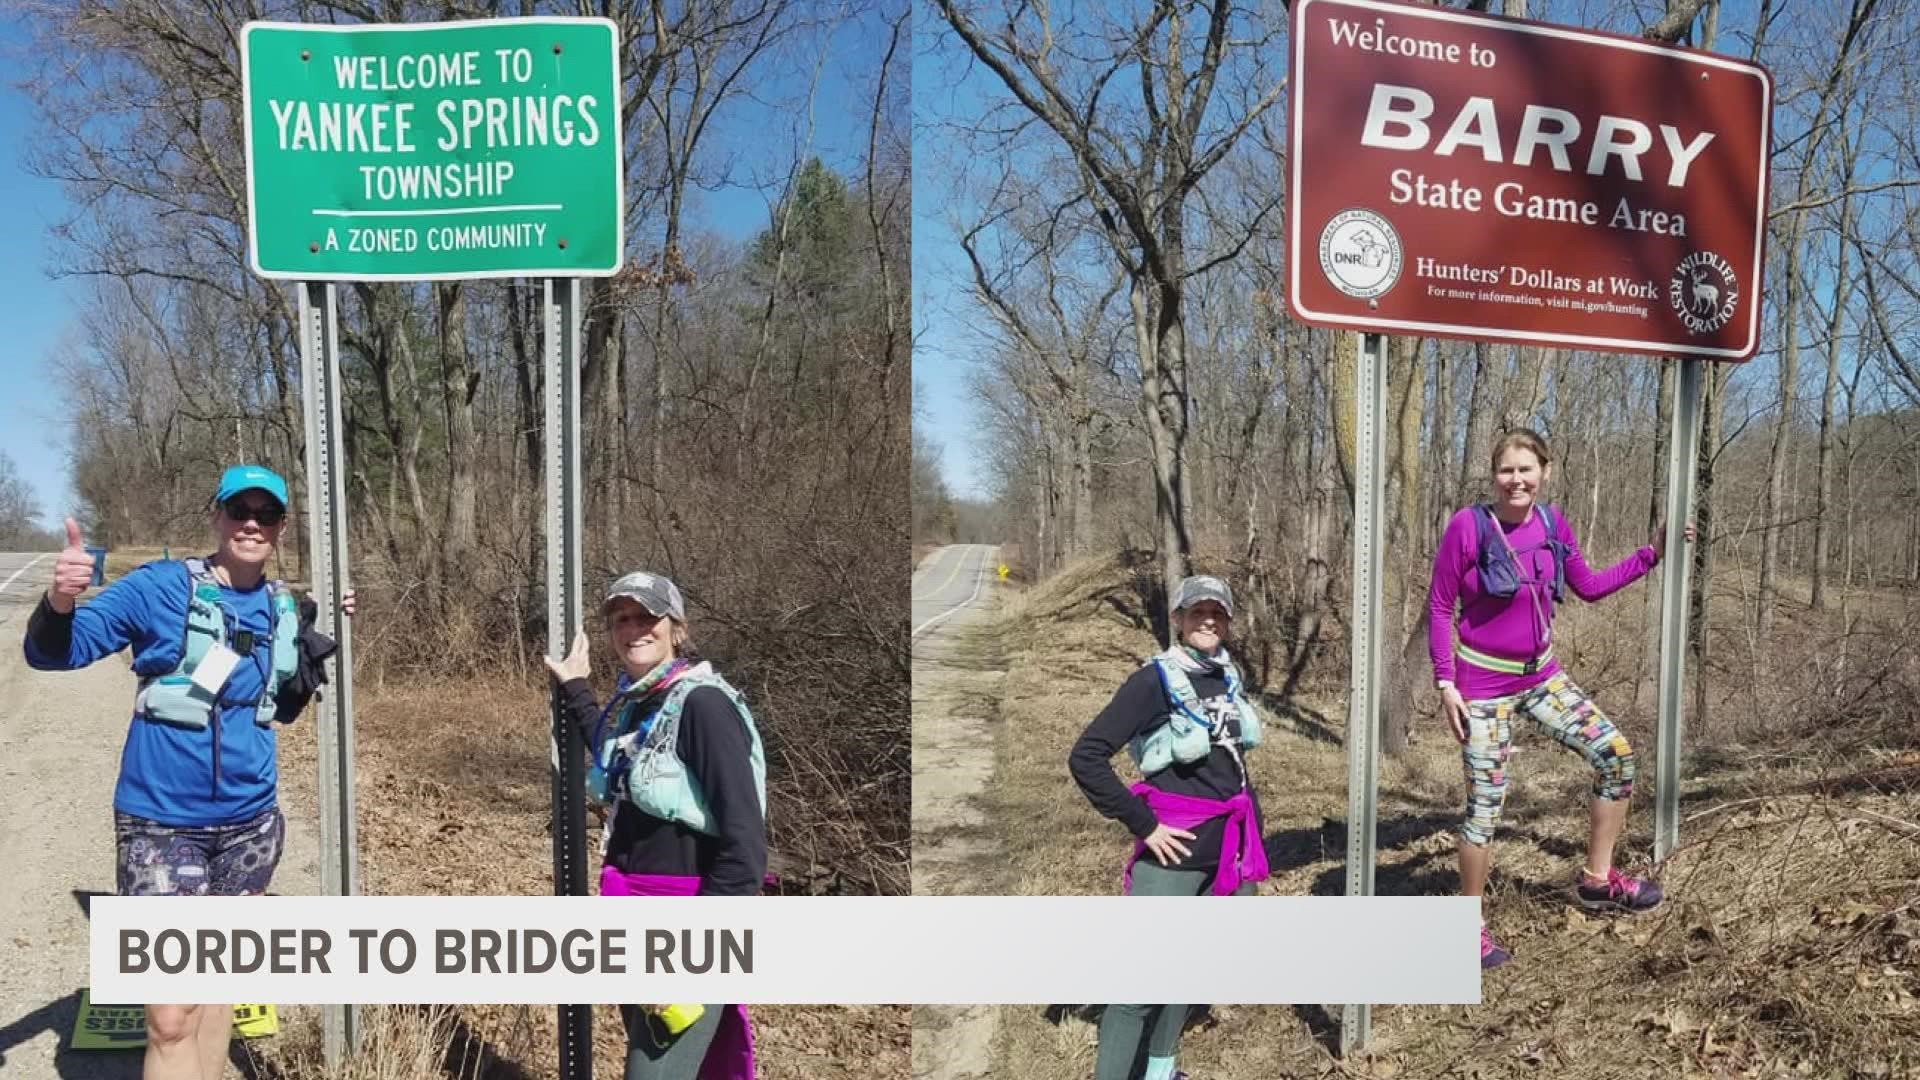 Three West Michigan women are running from the Michigan-Indiana border all the way to the Mackinac Bridge to raise funds for breast cancer research.